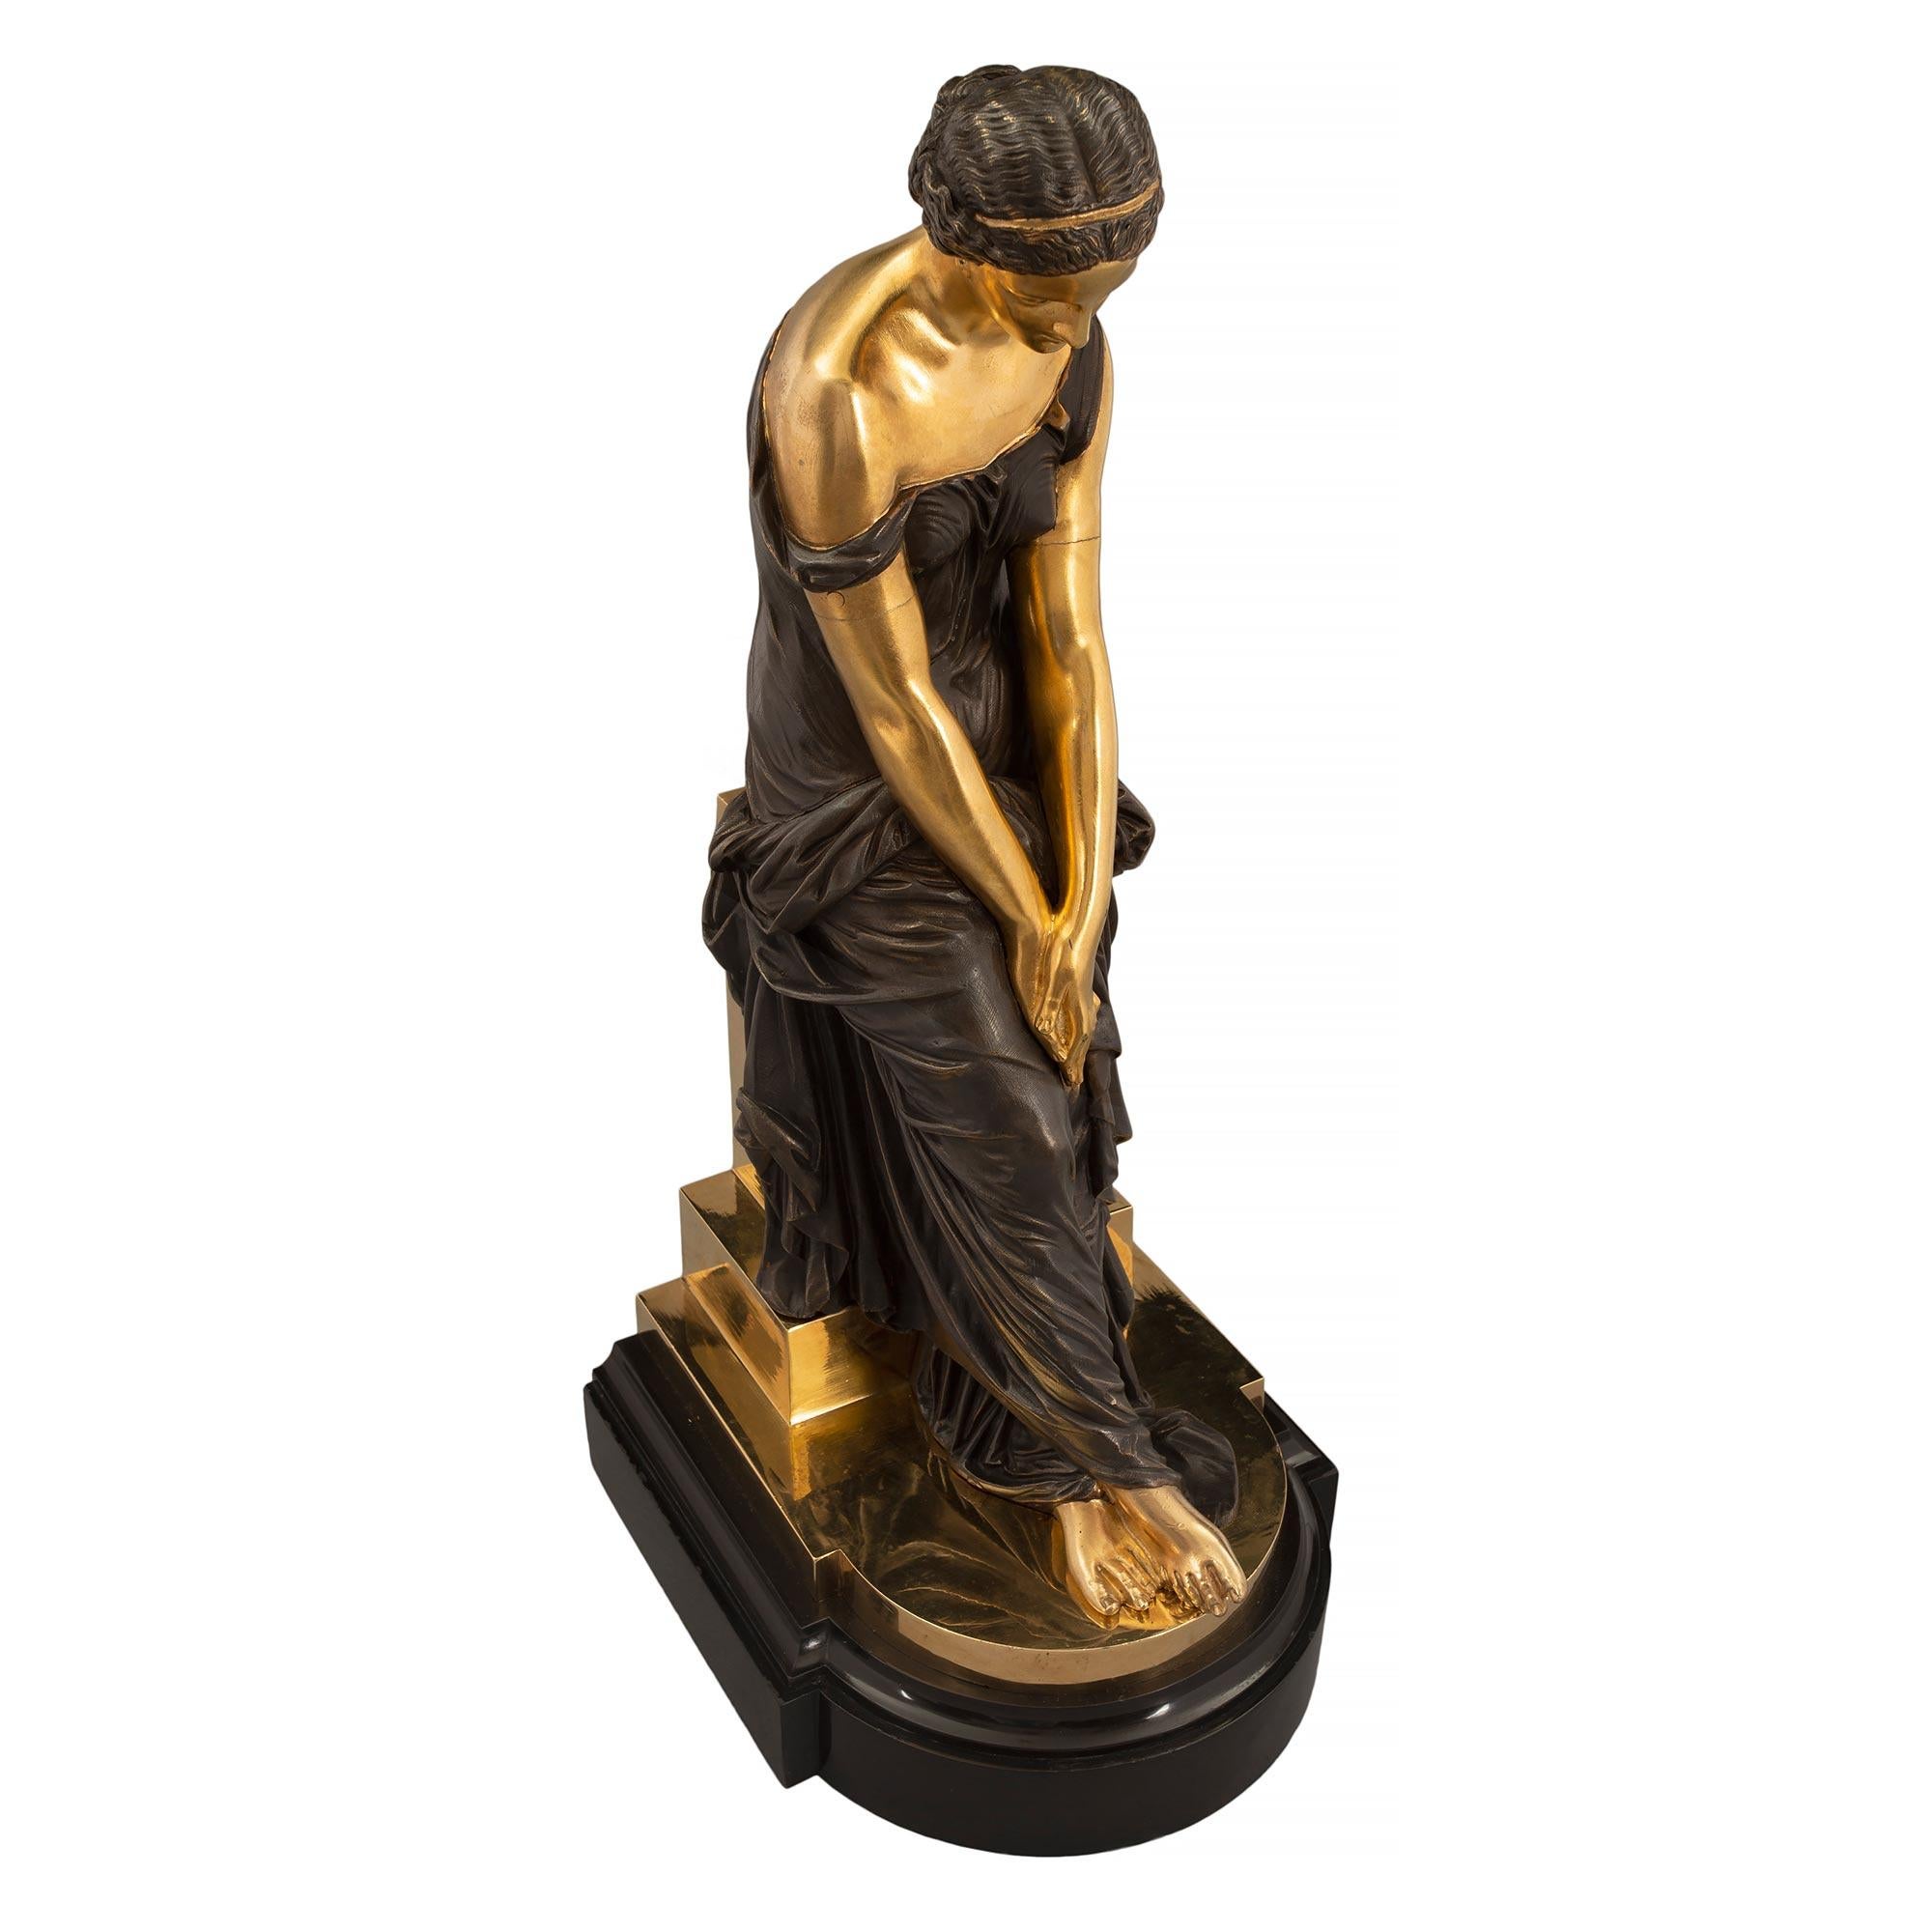 An elegant French mid 19th century Louis XVI st. patinated bronze and ormolu statue of a maiden, signed by Alexander Schoenwerck. The bronze is raised by an impressive Black Belgium marble mottled base with a rounded front. Above is the maiden, in